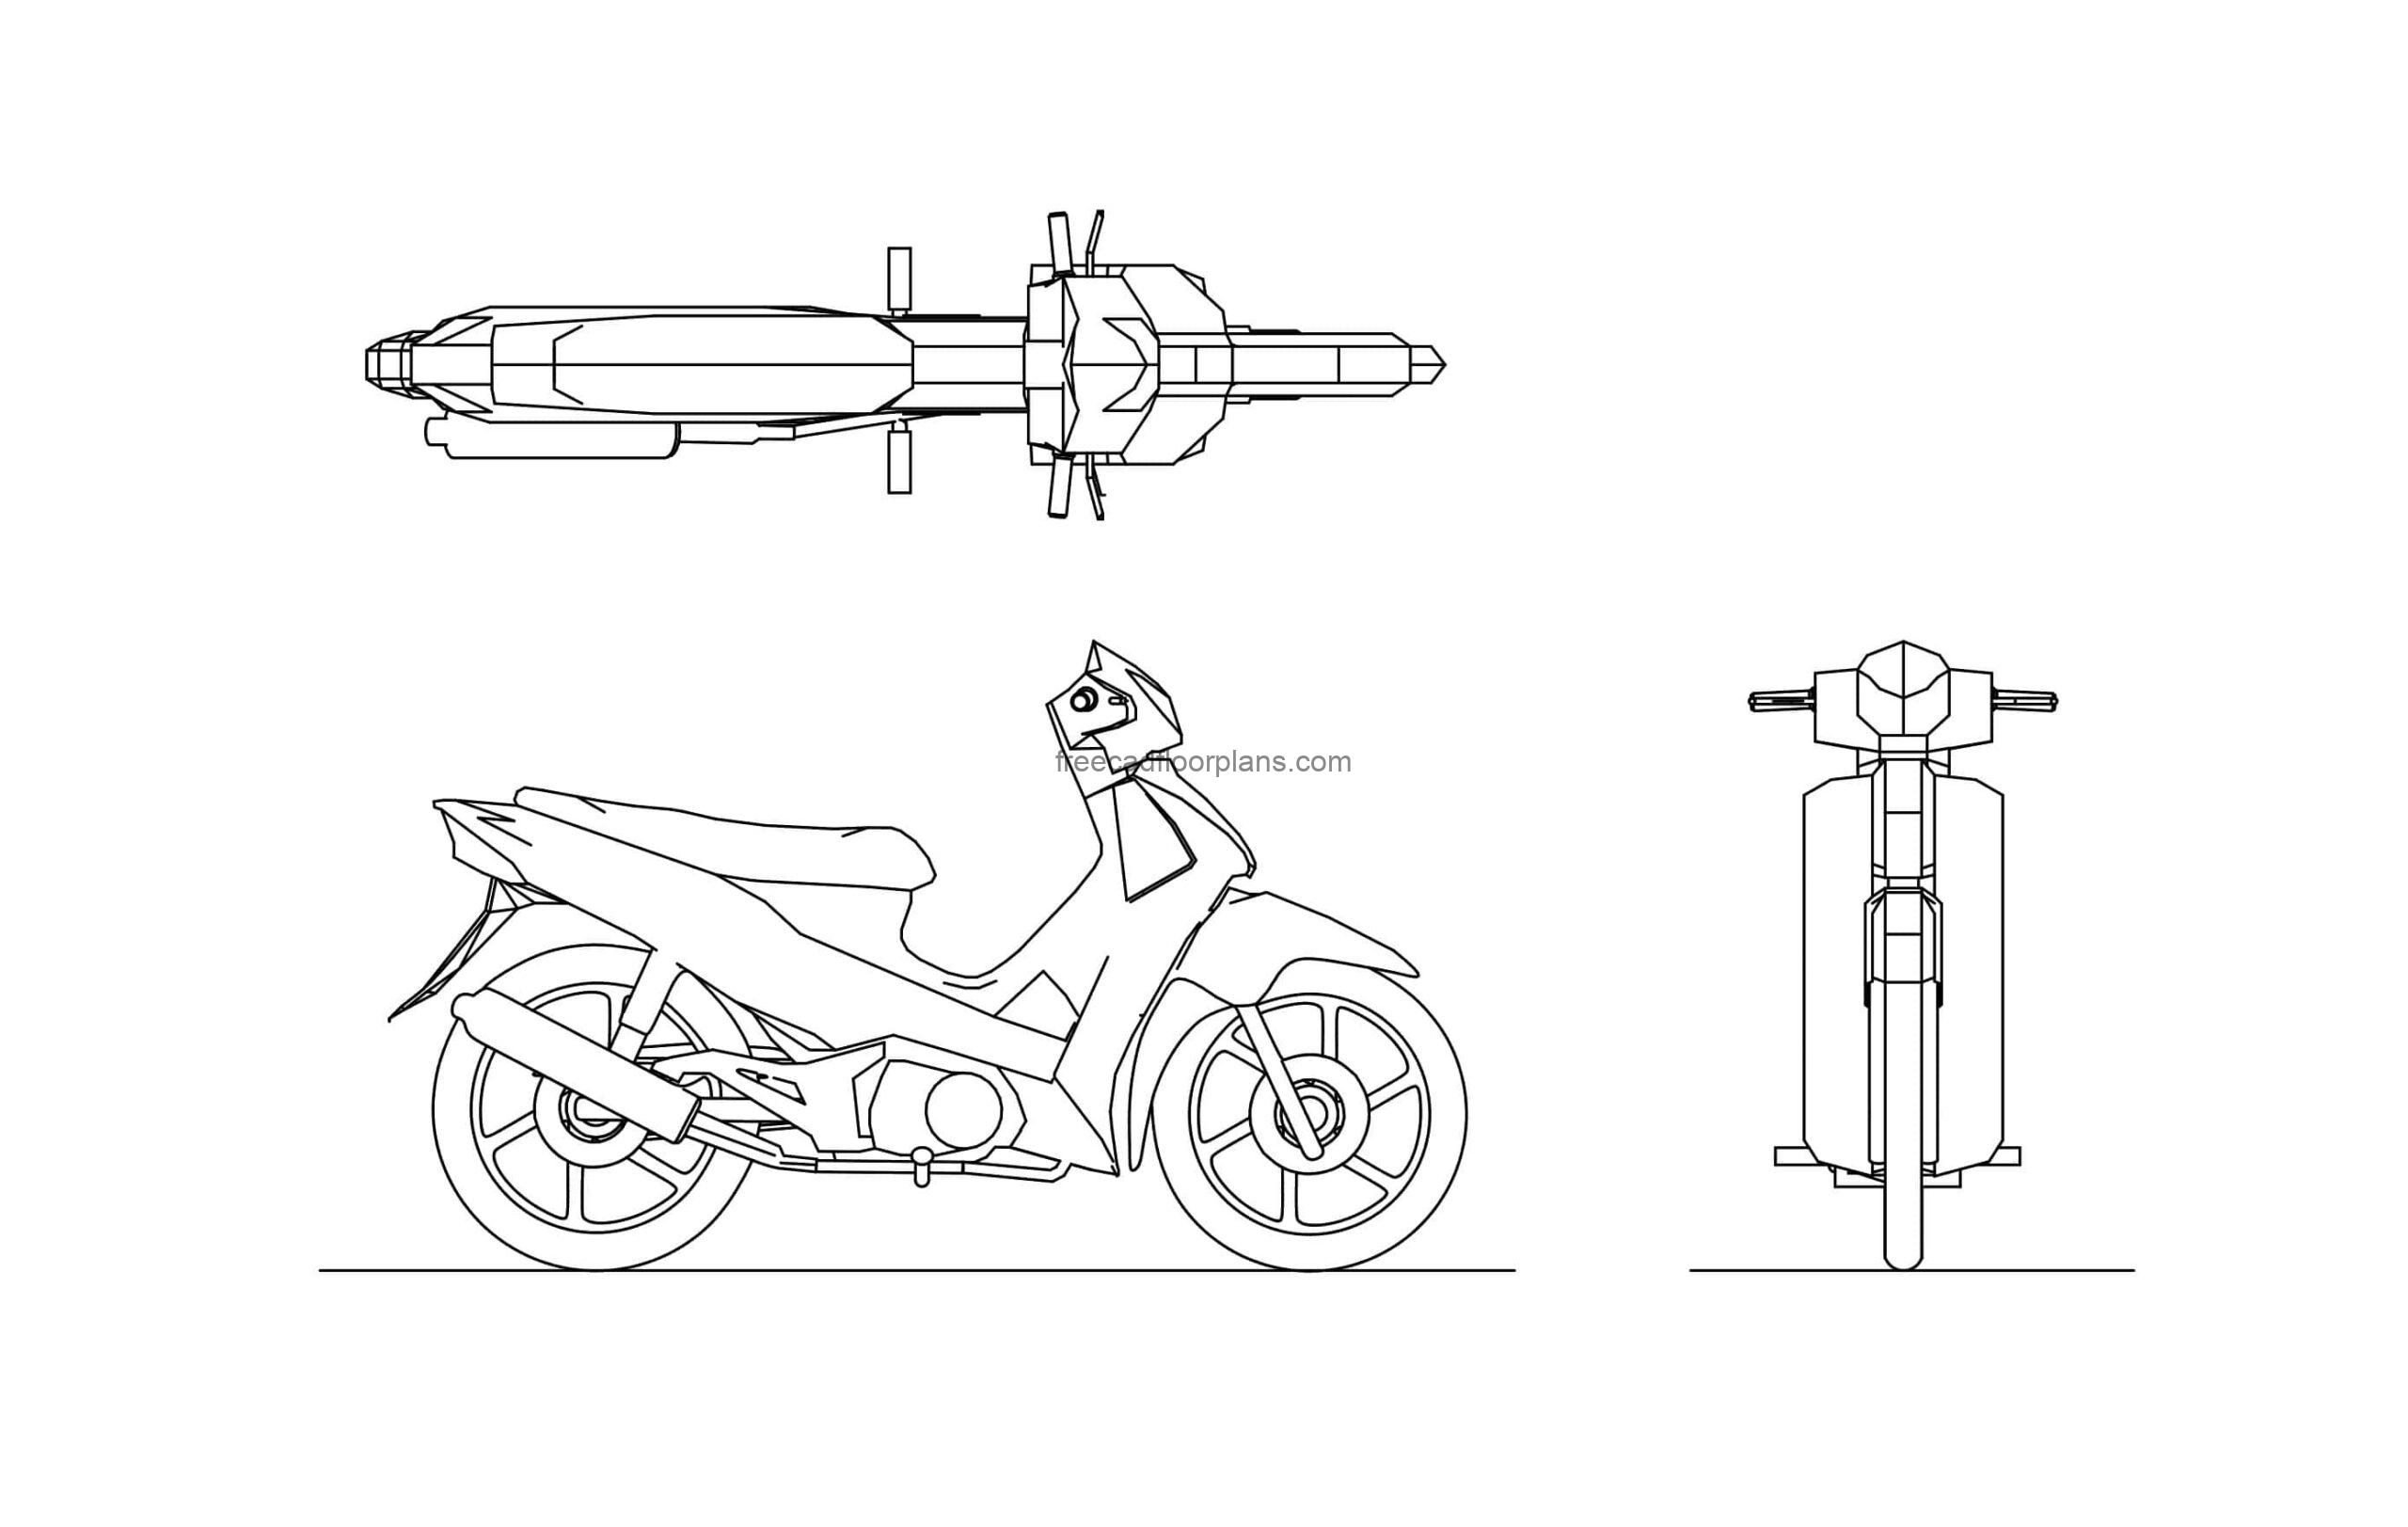 honda scooter autocad drawing cad block 2d views plan and elevations free file for download